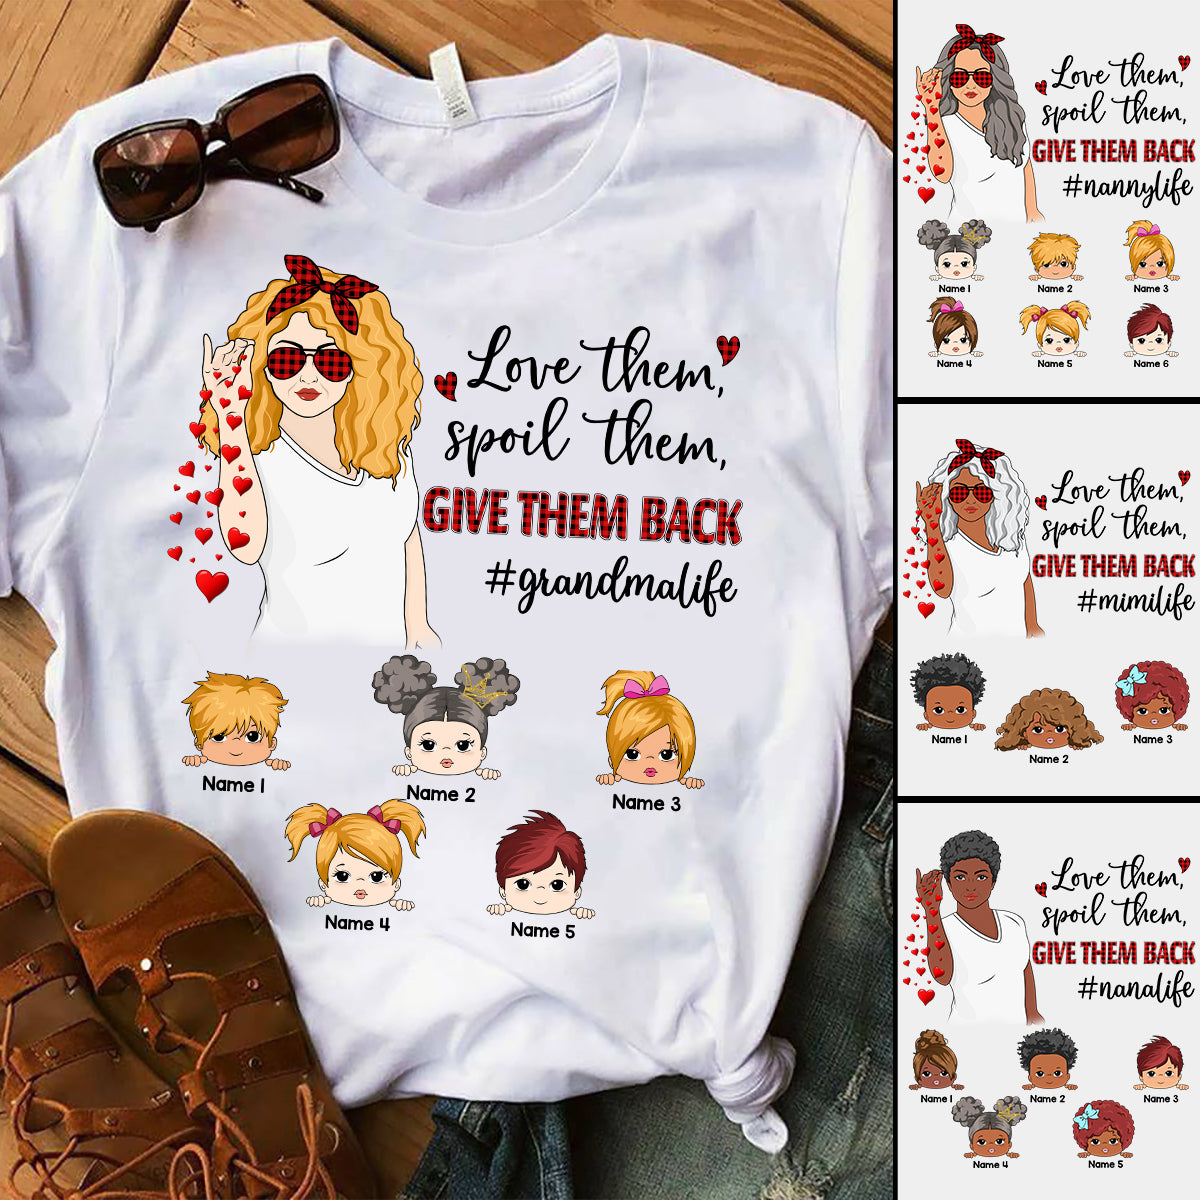 Love Them, Spoil Them, Give Them Back #Grandmalife, Funny Personalized Shirt For Grandma From Grandkids, Nickname, Names & Character Can Be Changed, Up To 12 Kids, TD98-399, TRHN, Vr2